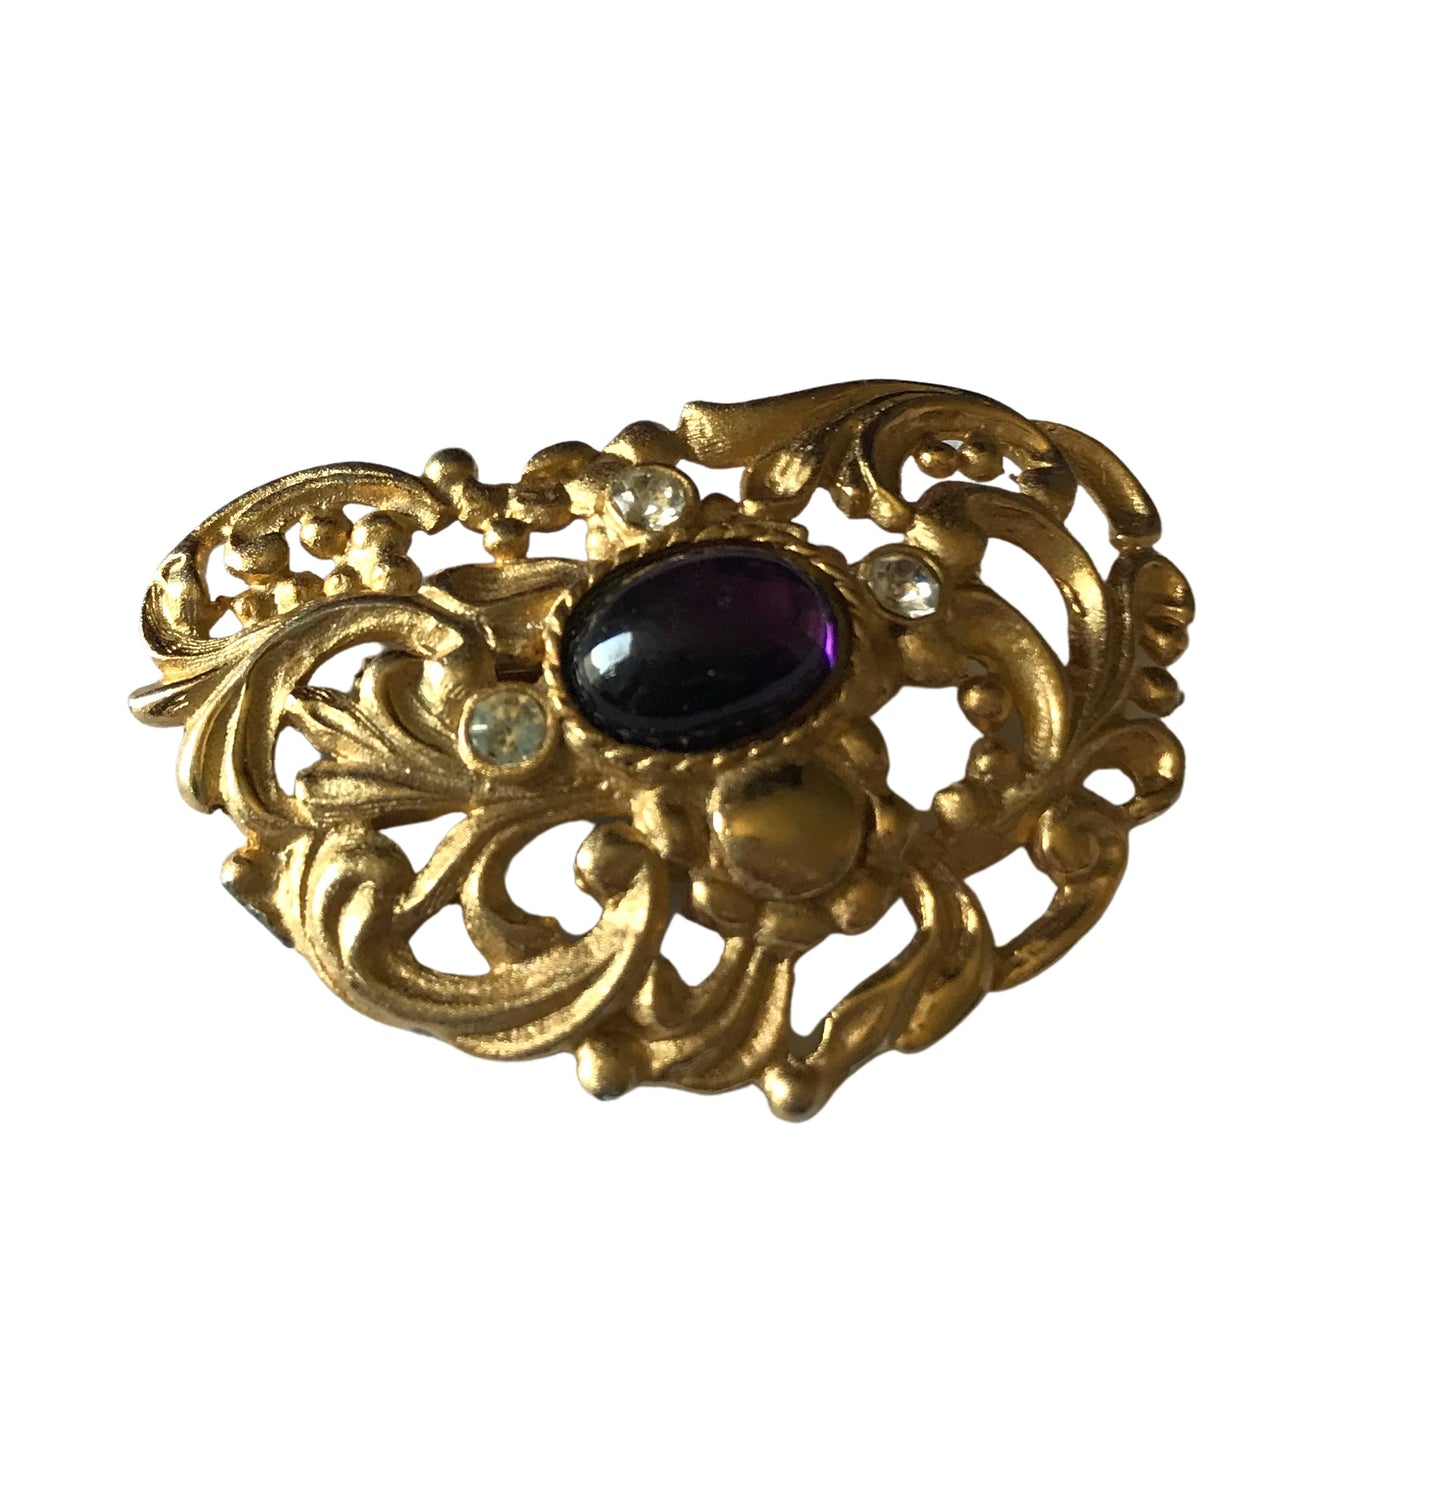 Art Nouveau Style Gold Tone Metal Brooch with Purple Cabochon circa 1980s